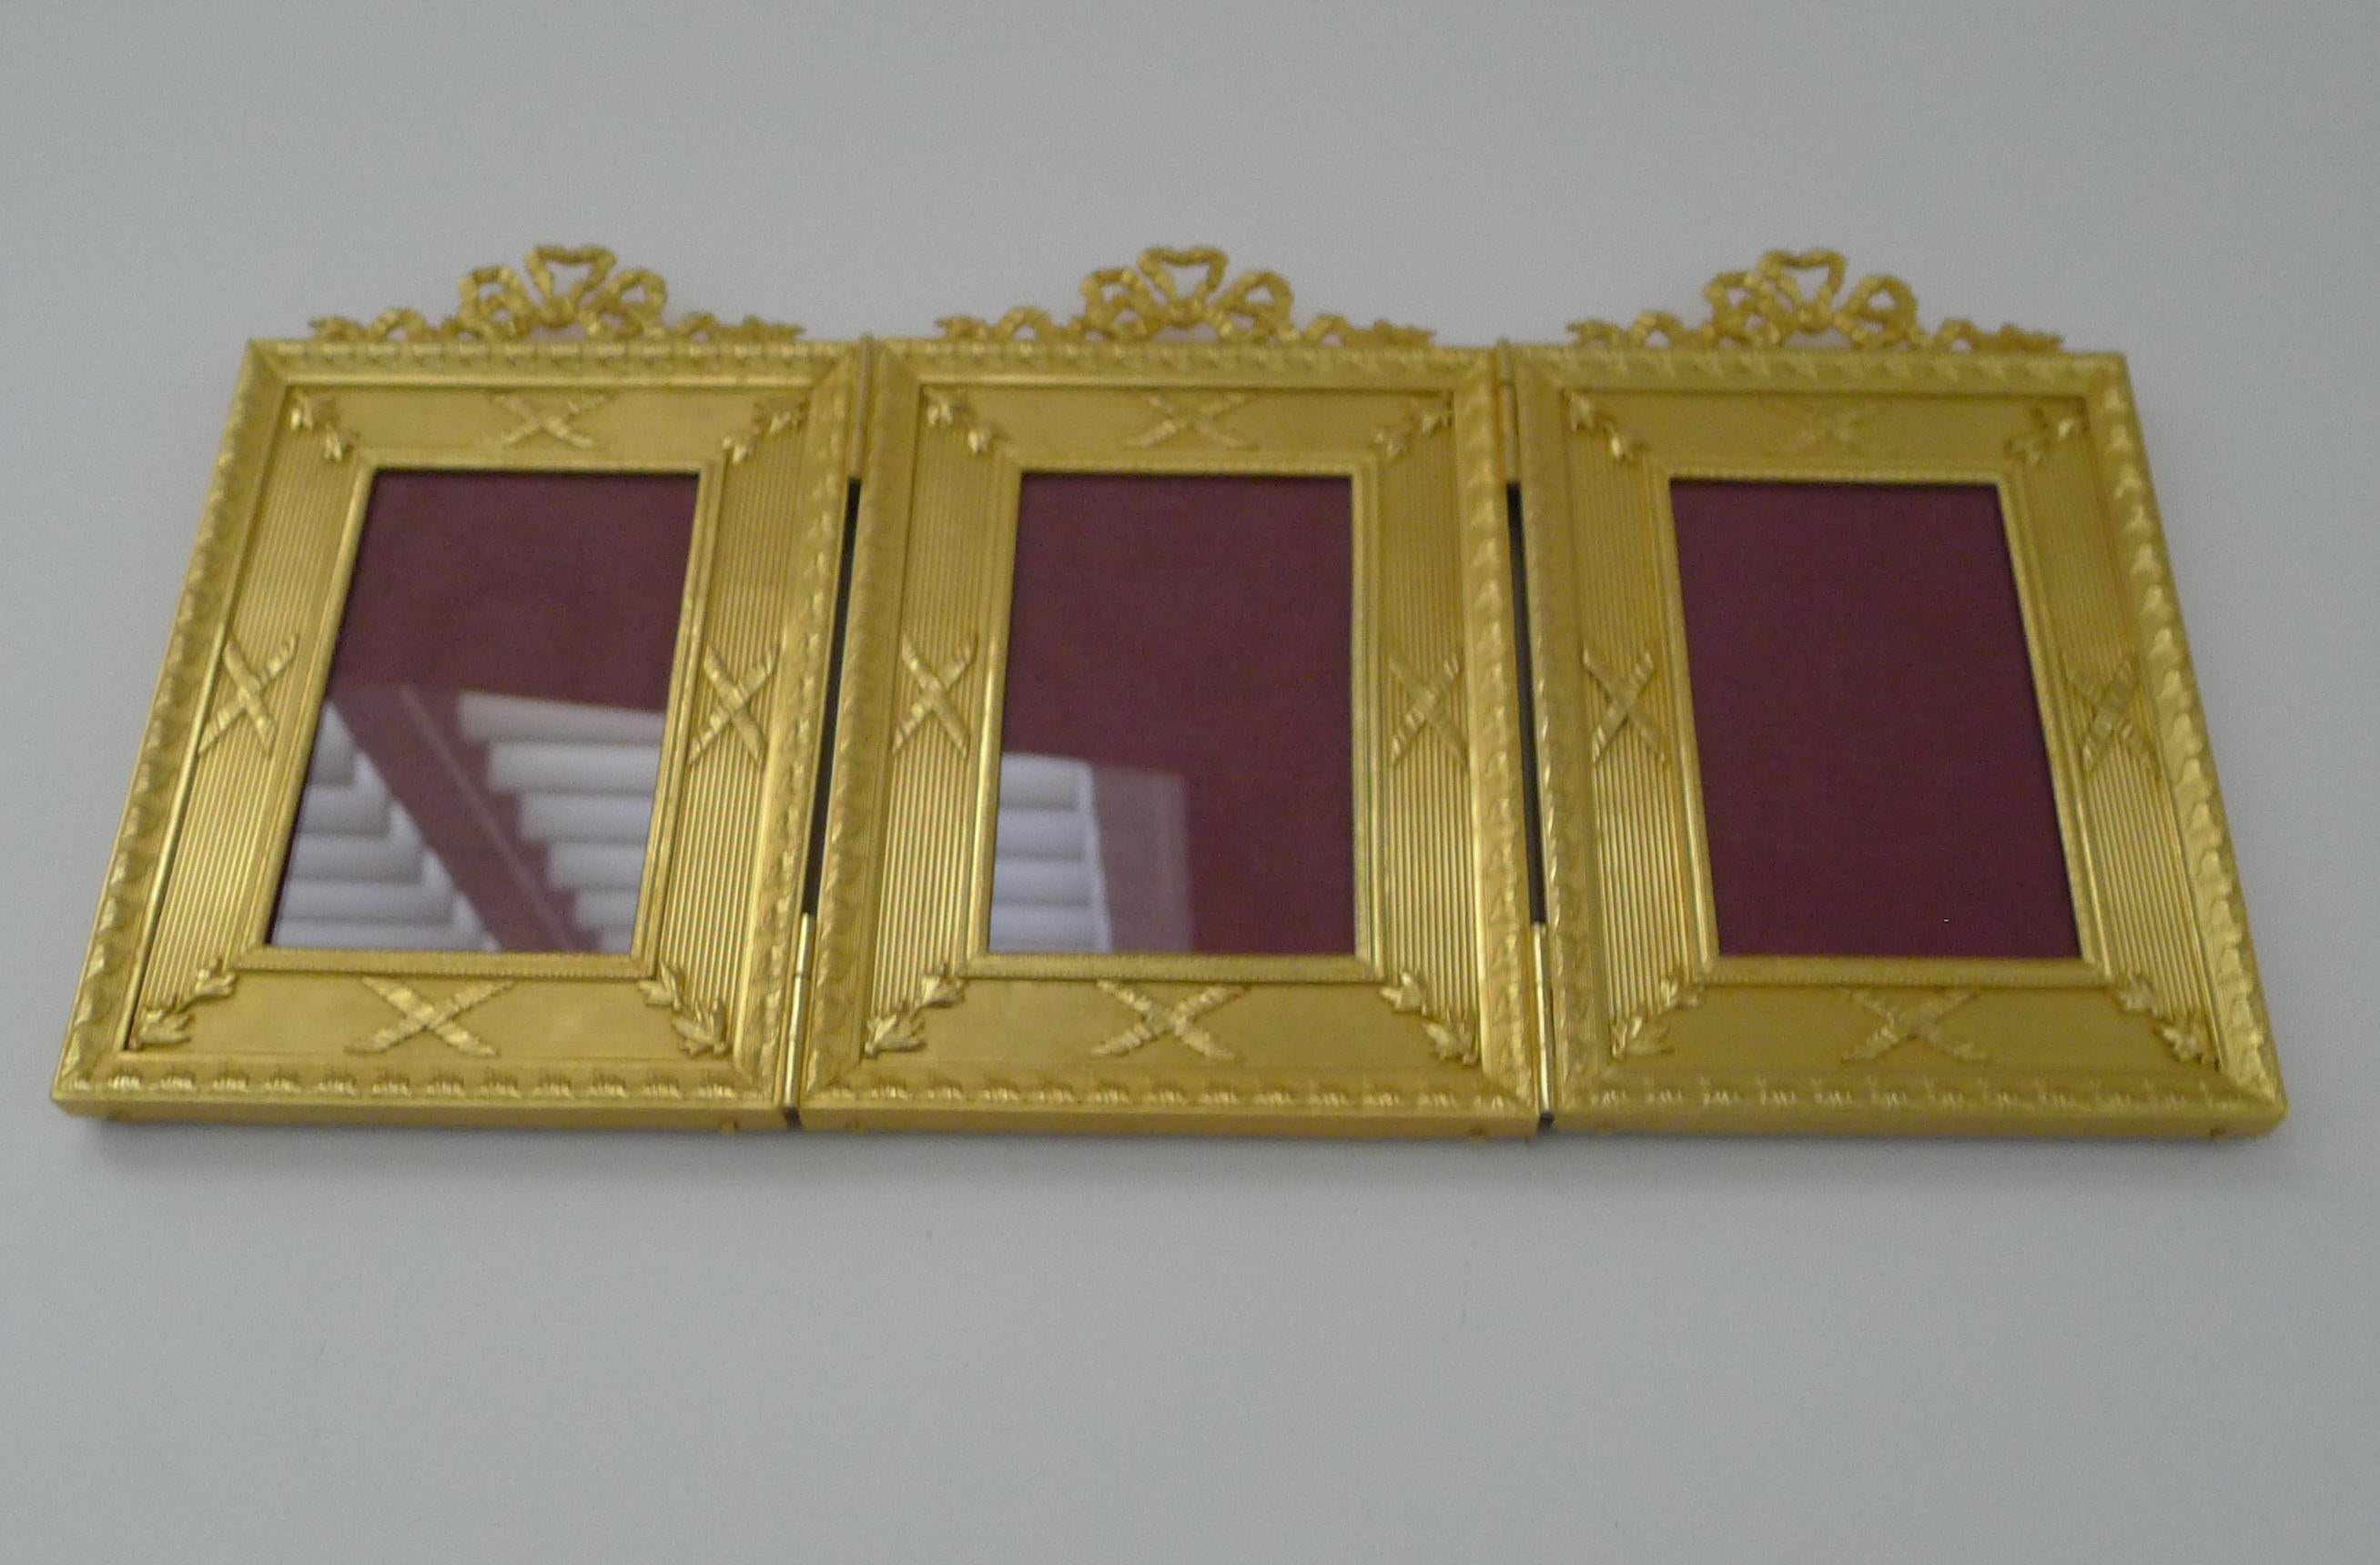 A stunning antique French gilded bronze triple picture frame, professionally restored to it's former glory.

The three hinged frames are made from hefty cast bronze and lavishly finished in gold, showcasing their beautiful design and ribbon and bow